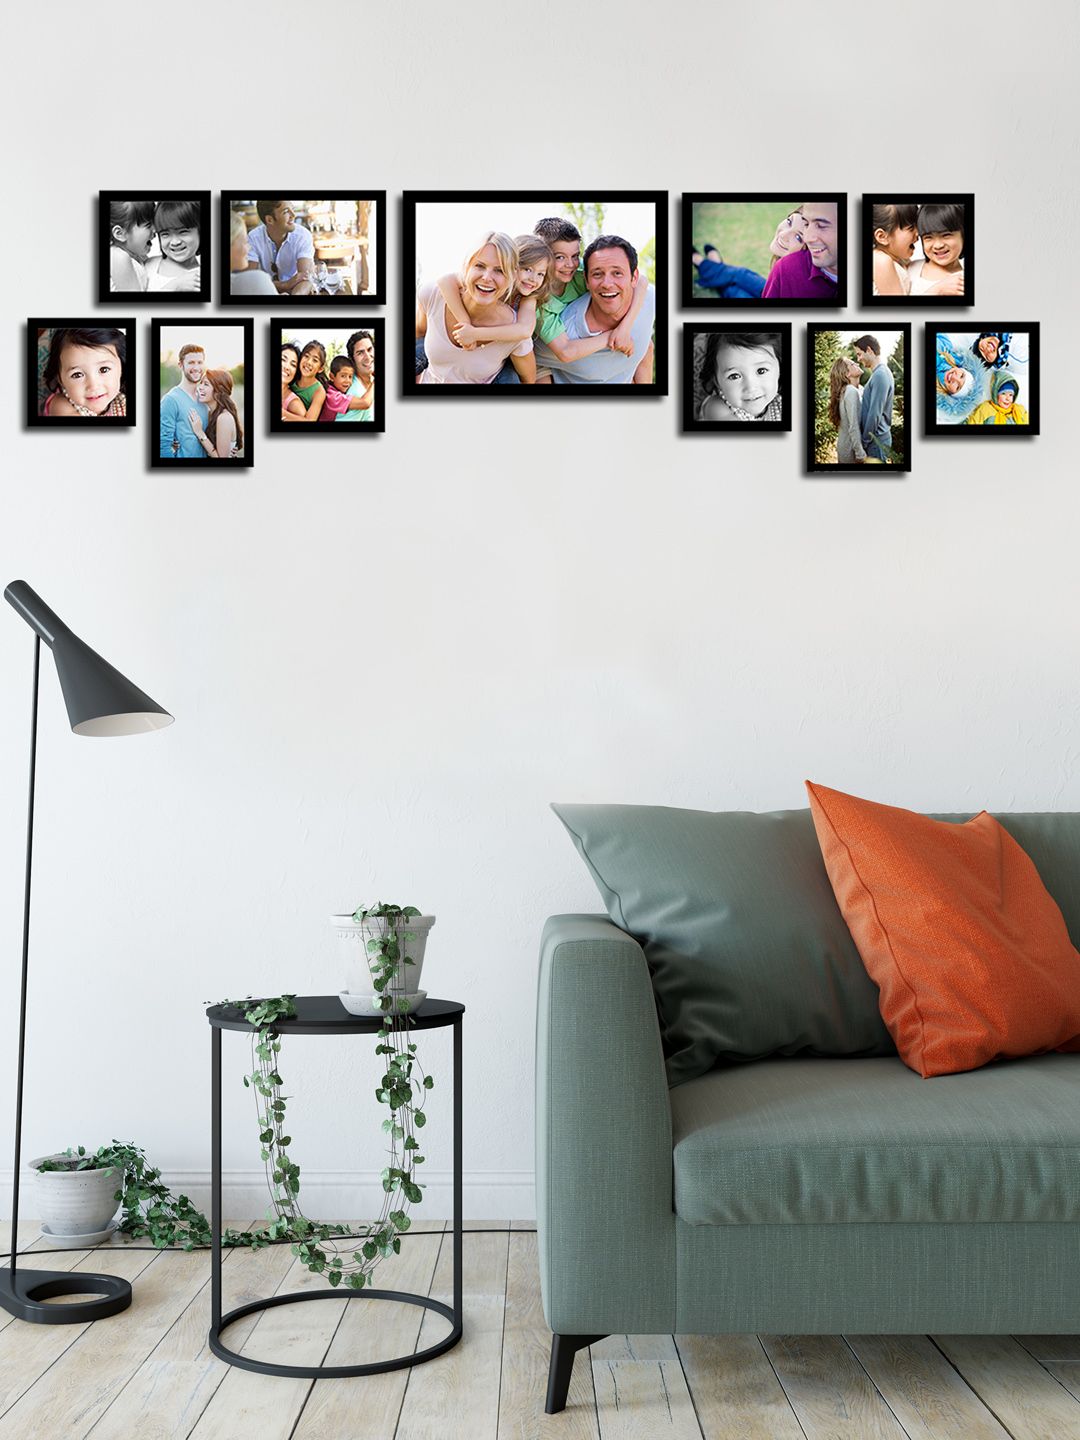 Art Street Black Set of 11 Wall Photo Frames Price in India